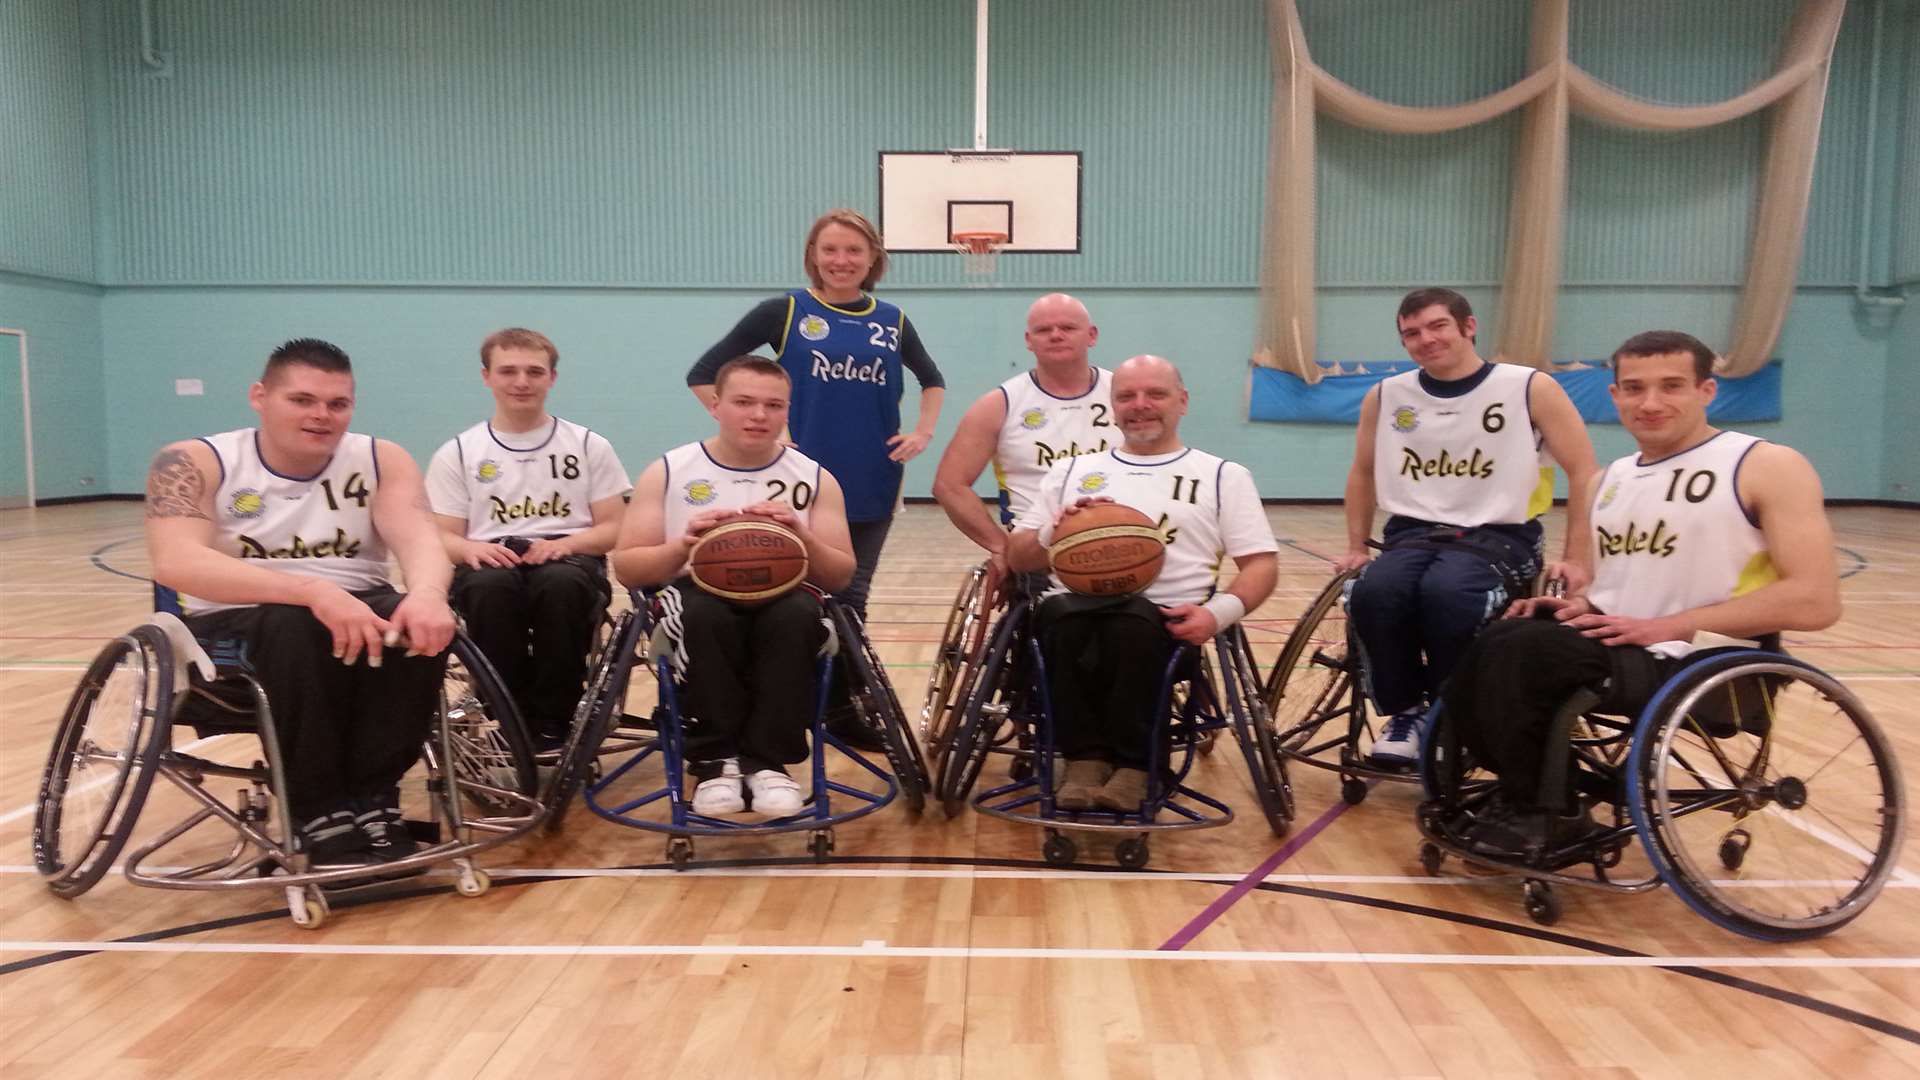 Tracey Course with wheelchair basketball team, Maidstone Warrior Rebels.